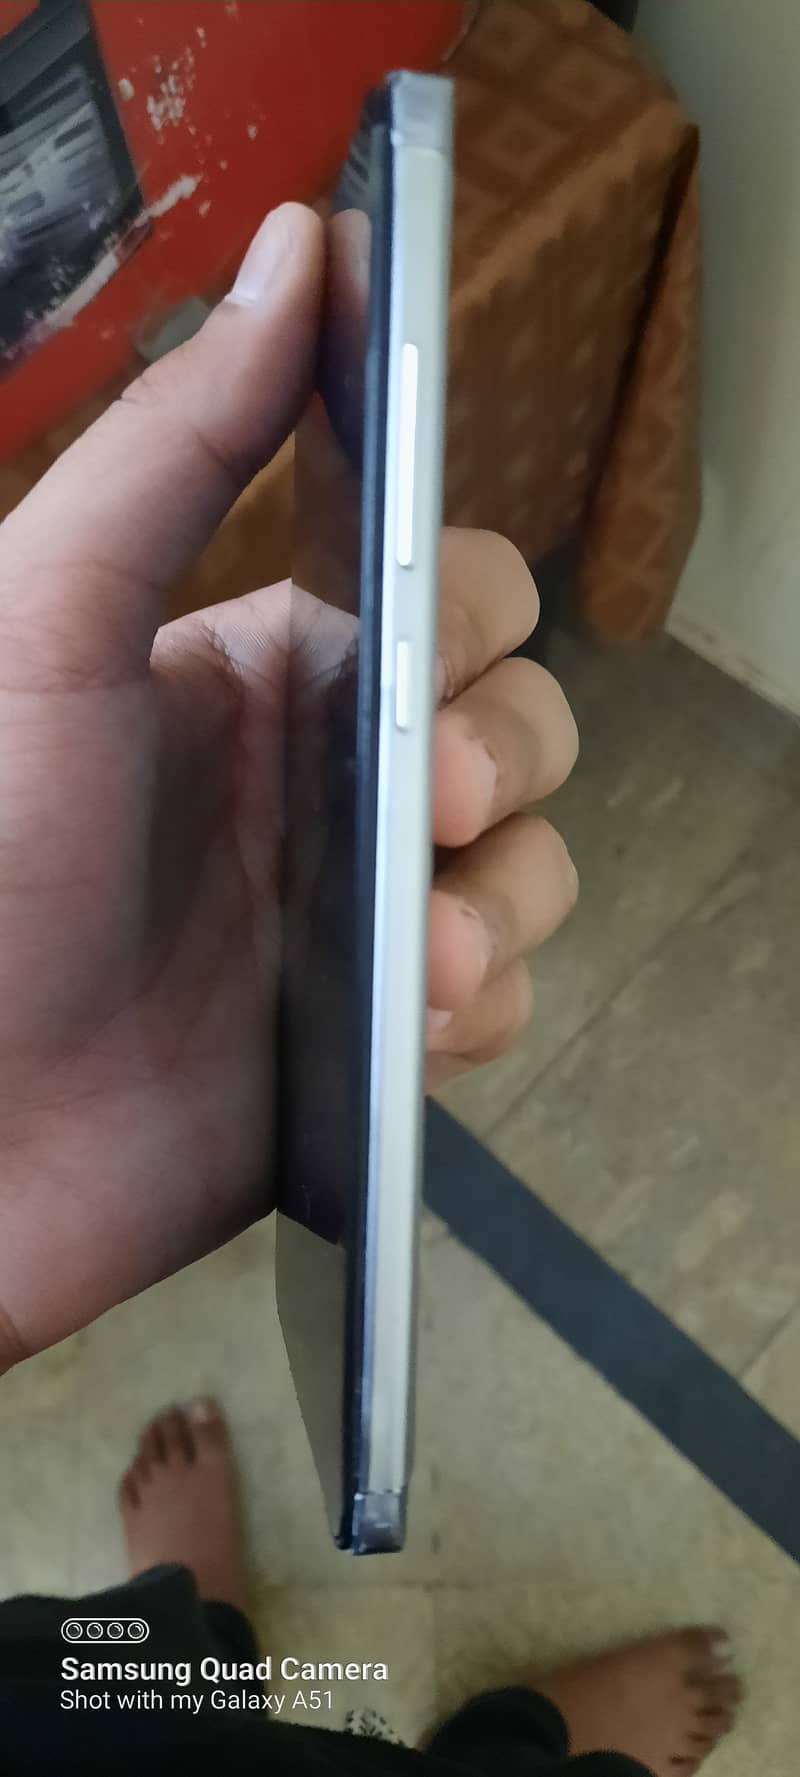 Redmi note 4 with box price negotiable 5